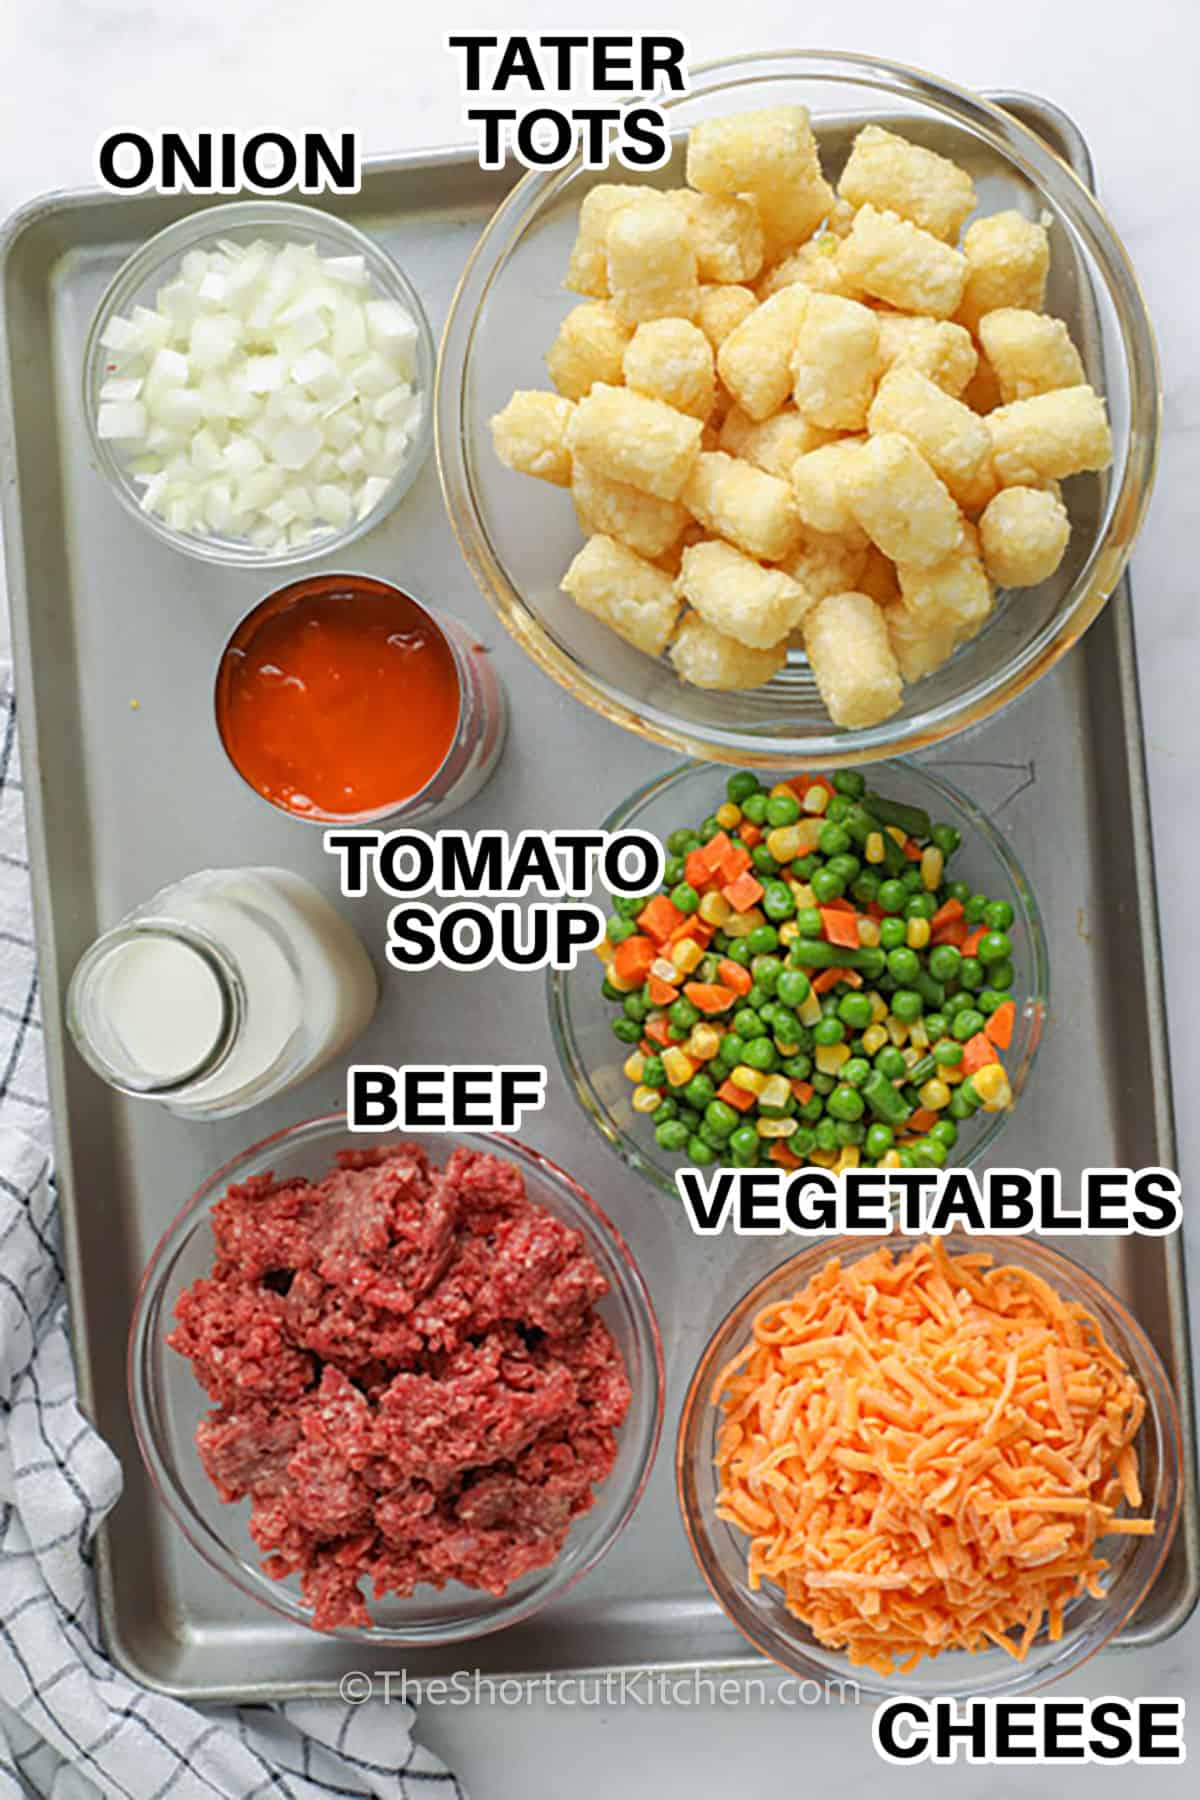 tater tots , onions , tomato soup , beef , vegetables and cheese with labels to make Shortcut Shepherd’s Pie